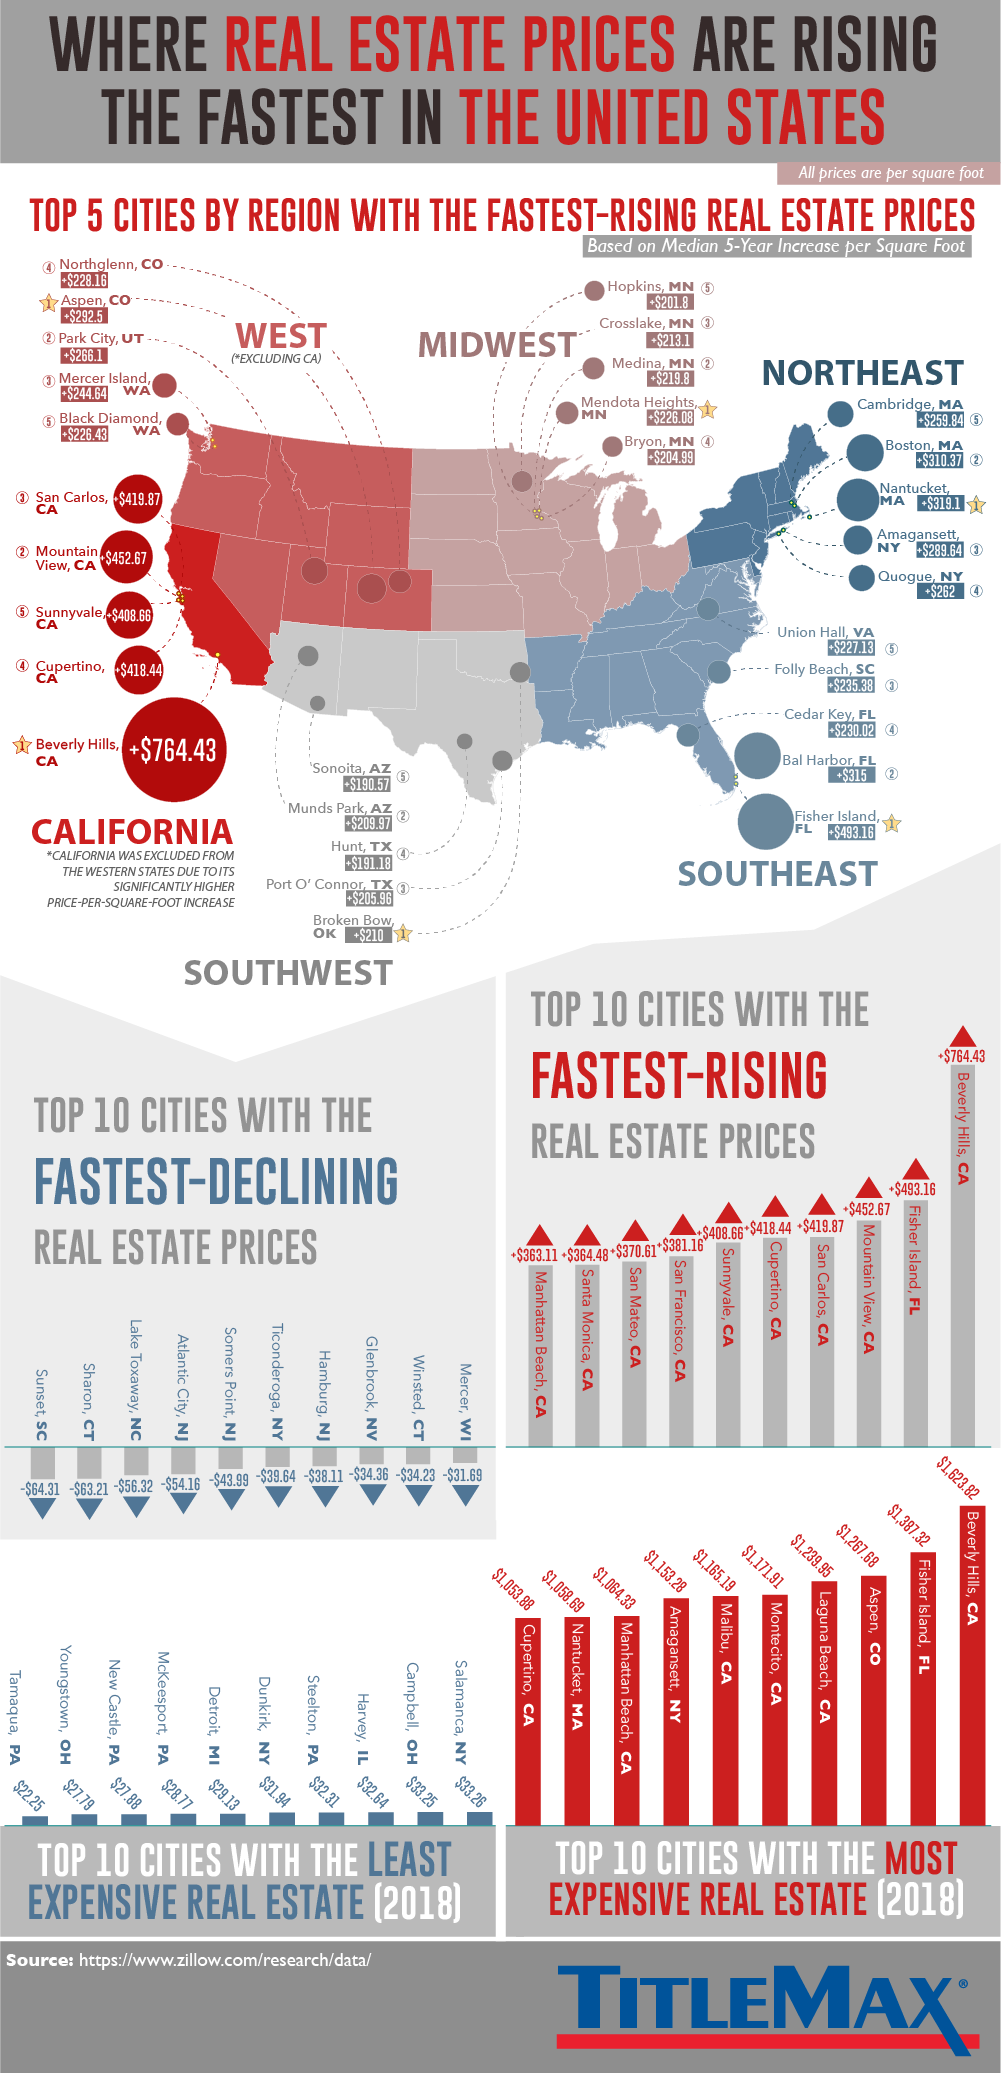 Where Real Estate Prices Are Rising the Fastest in the U.S.